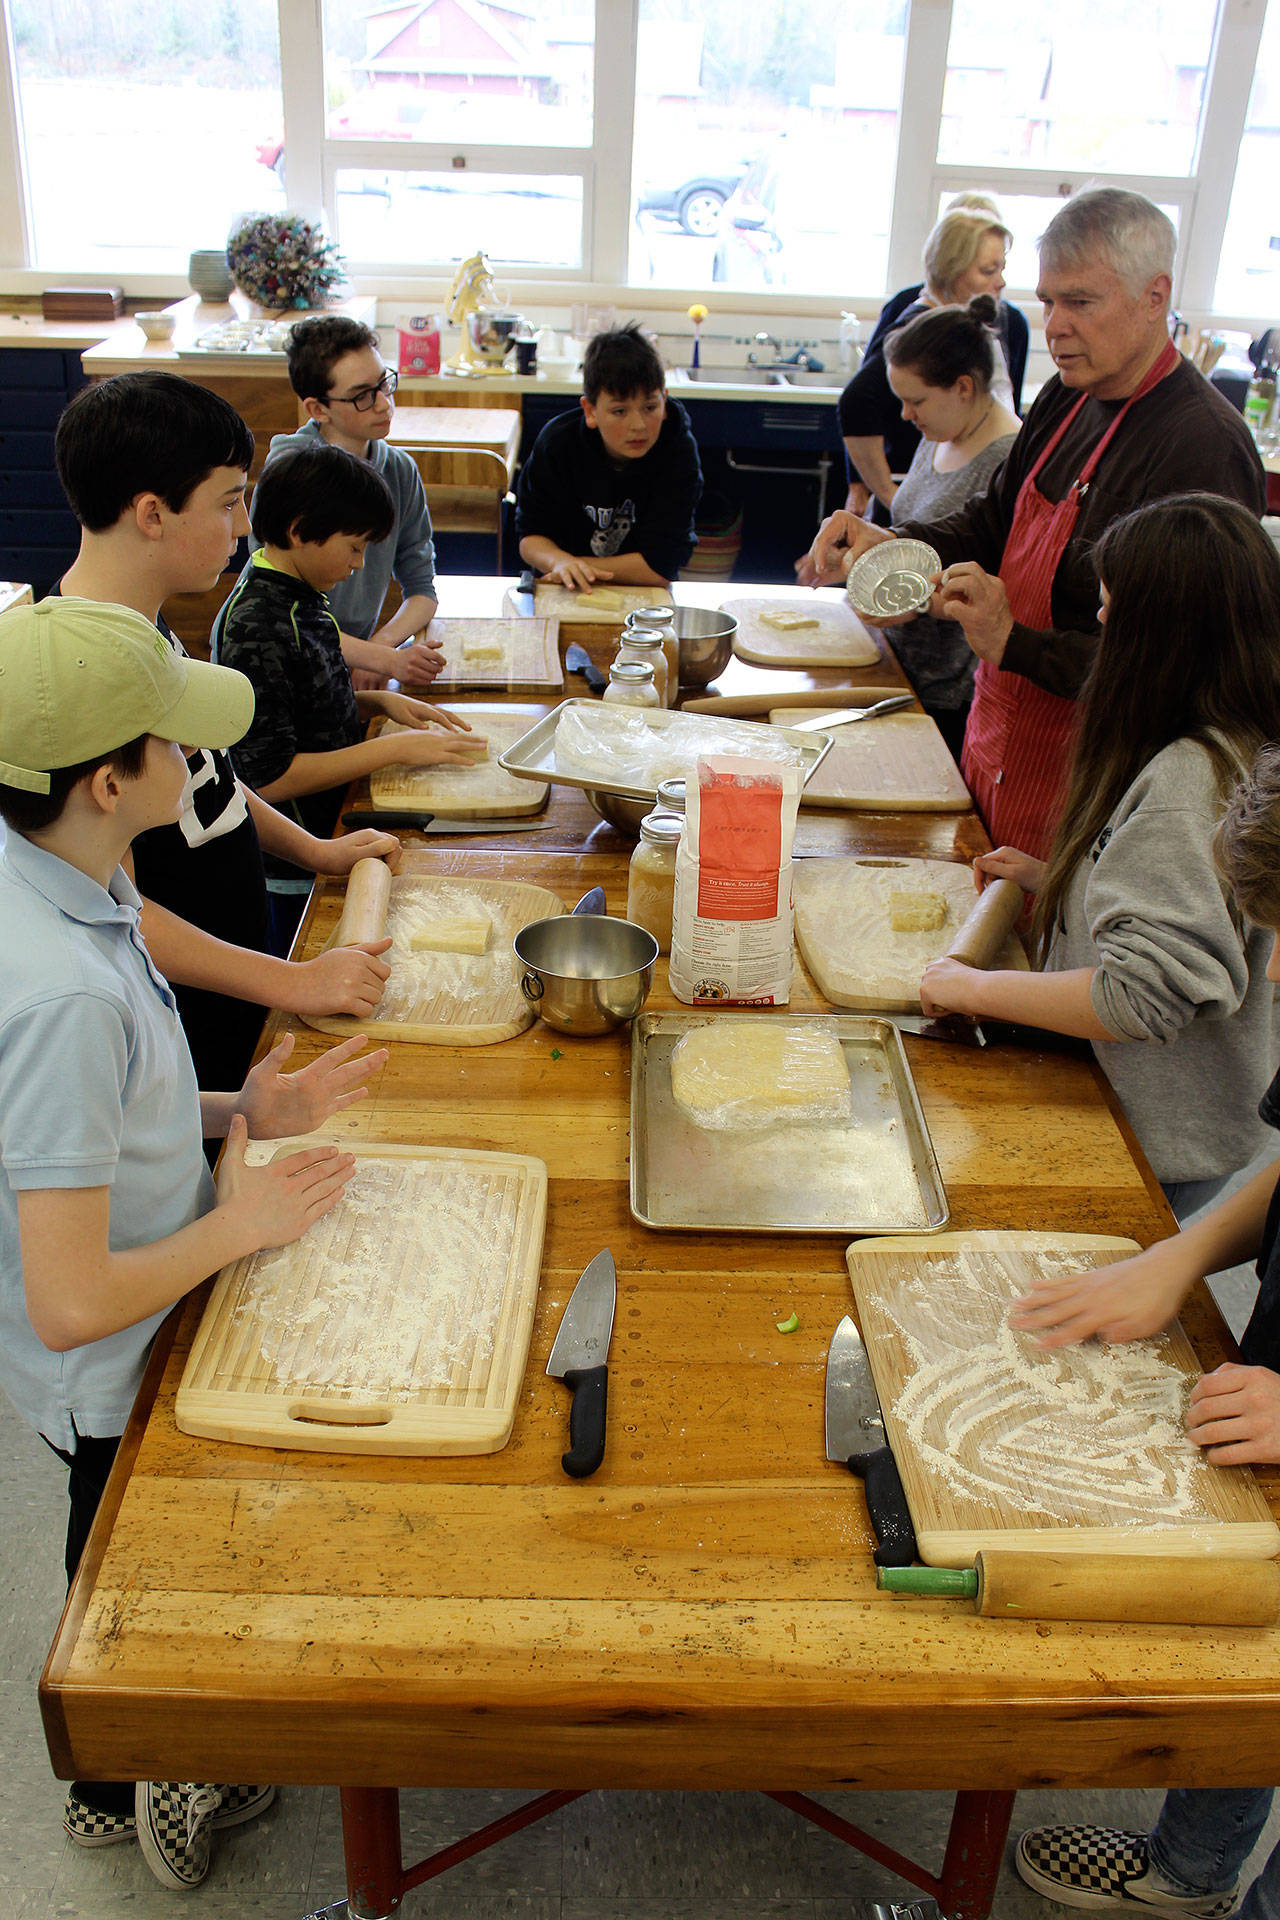 Joe Whisenand leads a lesson in how pie dough is made, including how to rest it, roll it and cut it. (Photo by Patricia Guthrie/Whidbey News Group)